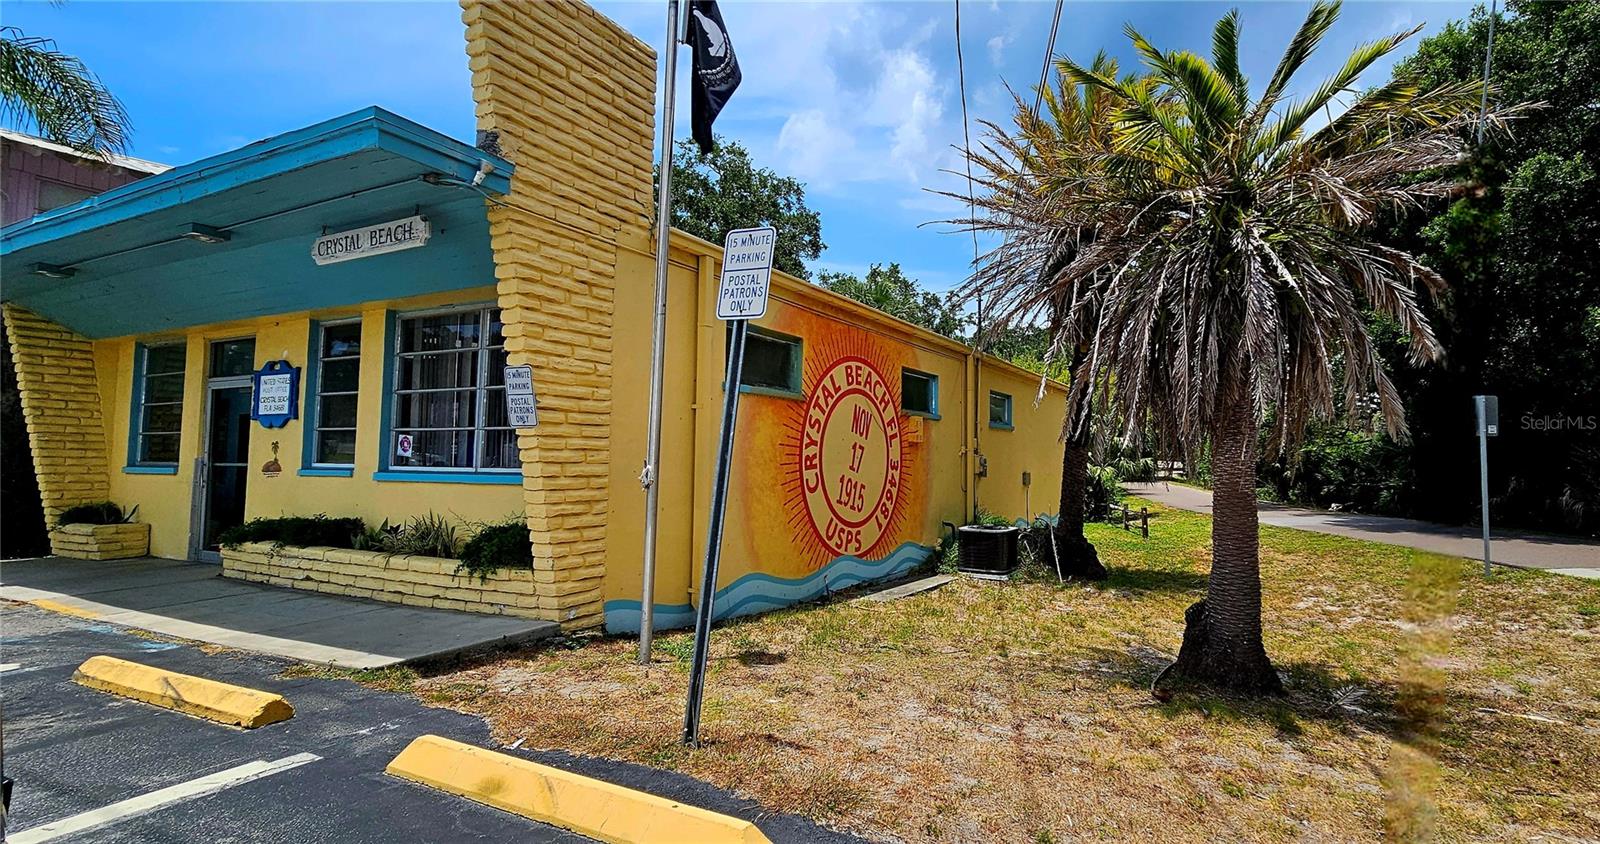 Live the small town  life in 34681. Local post office, golf cart friendly streets and the Pinellas trail for when you want to checkout other small town favorites like Dunedin and Tarpon Springs